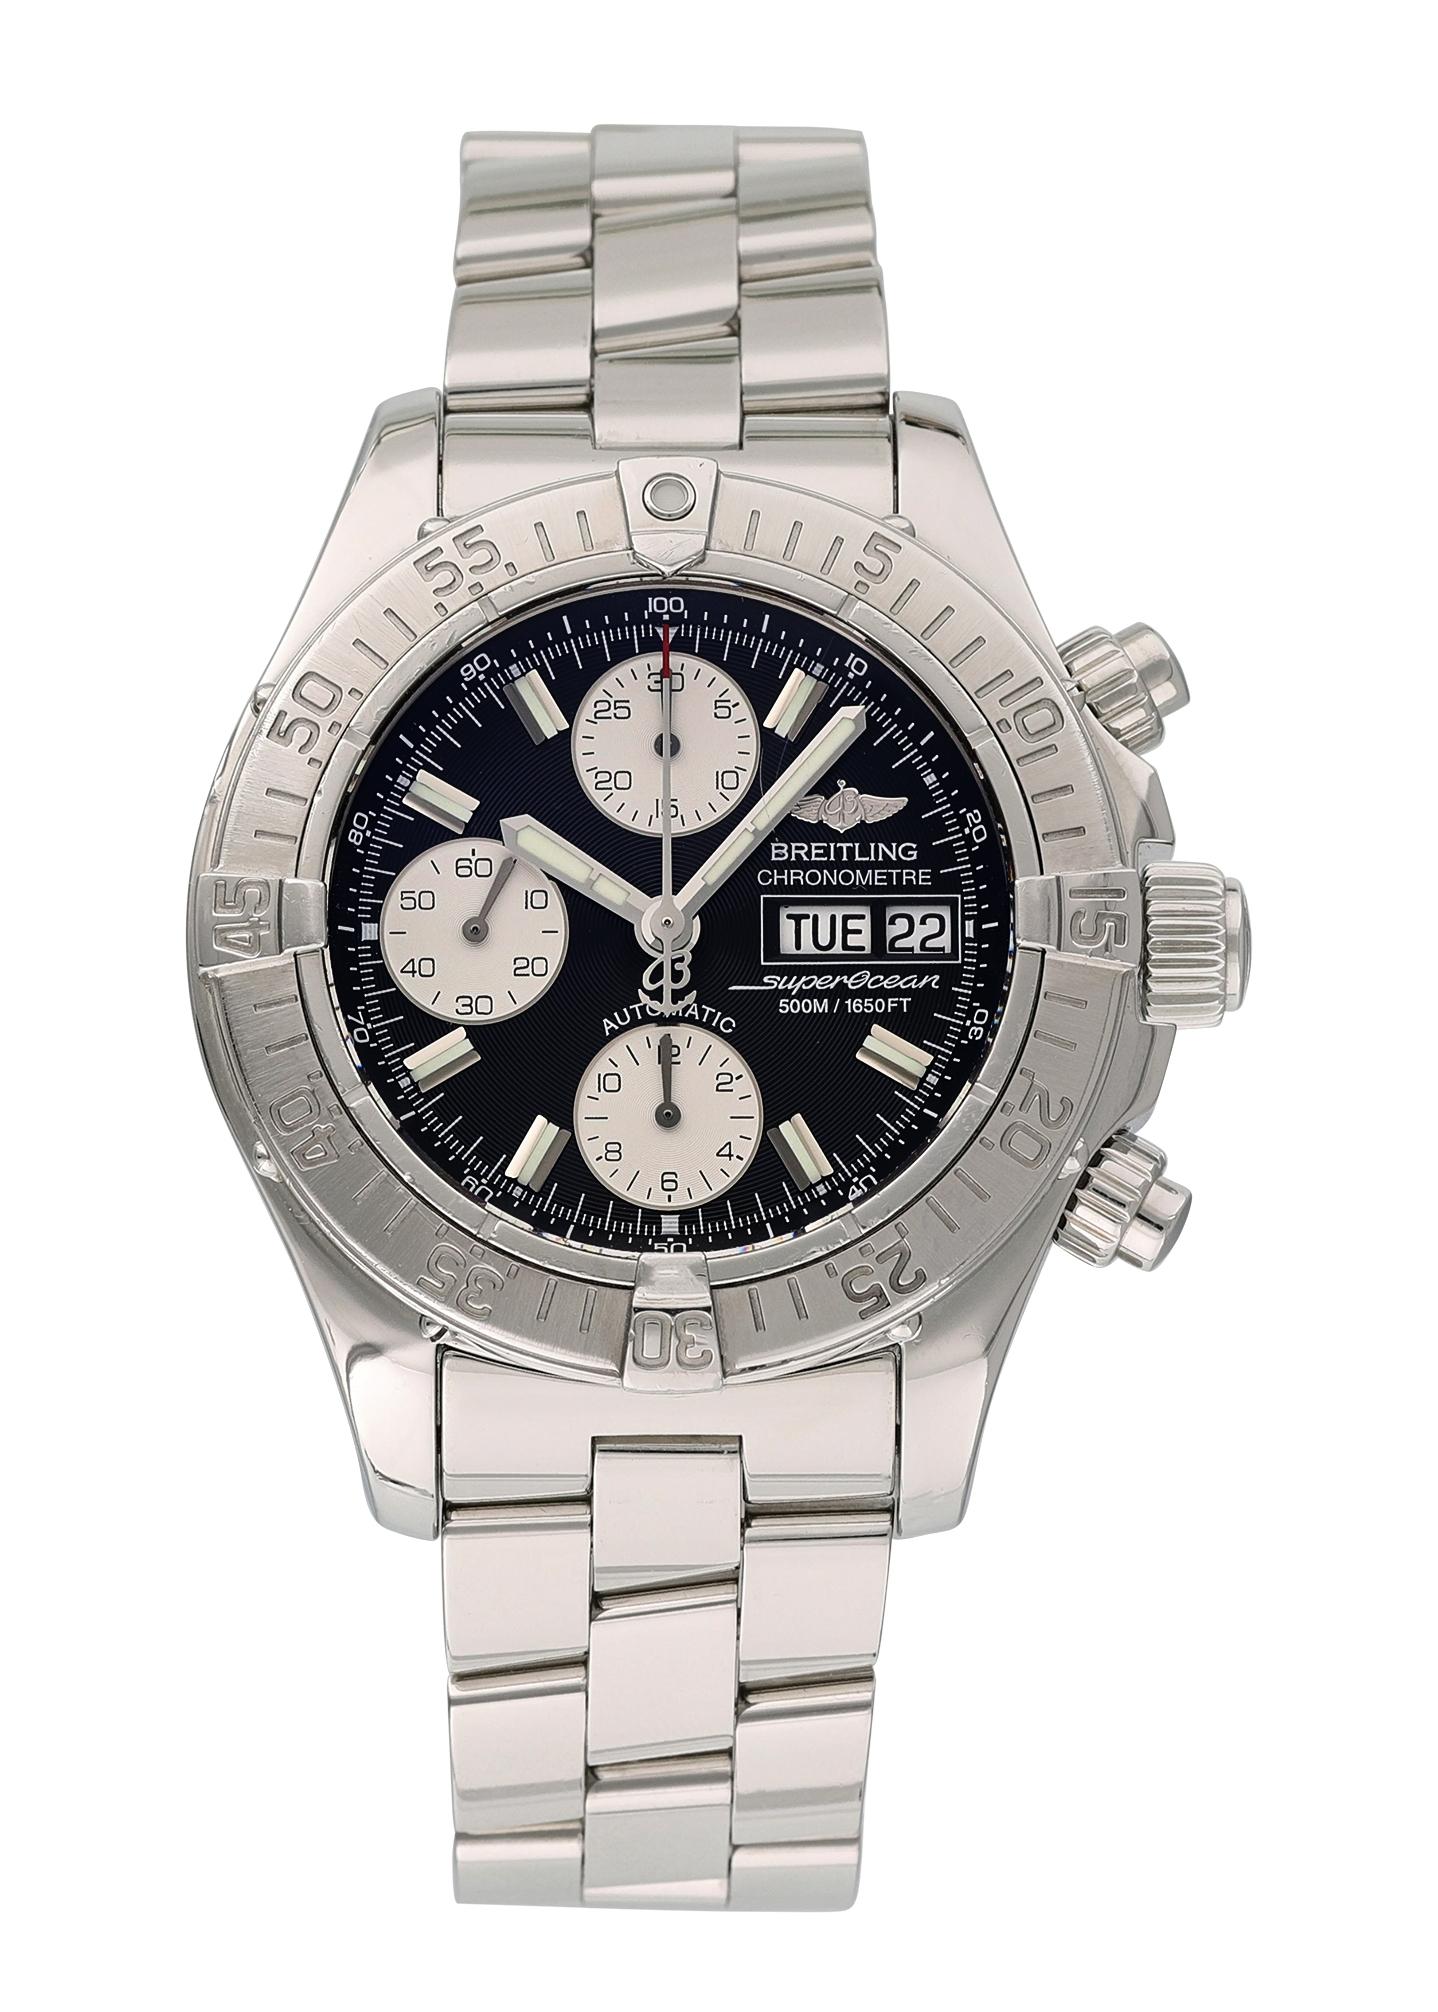 Breitling SuperOcean Day Date A13340 Diver Men's Watch
42mm Stainless Steel case. 
Stainless Steel Unidirectional bezel. 
Black dial with Luminous Steel hands and index hour markers. 
Minute markers on the outer dial. 
Date display at the 3 o'clock